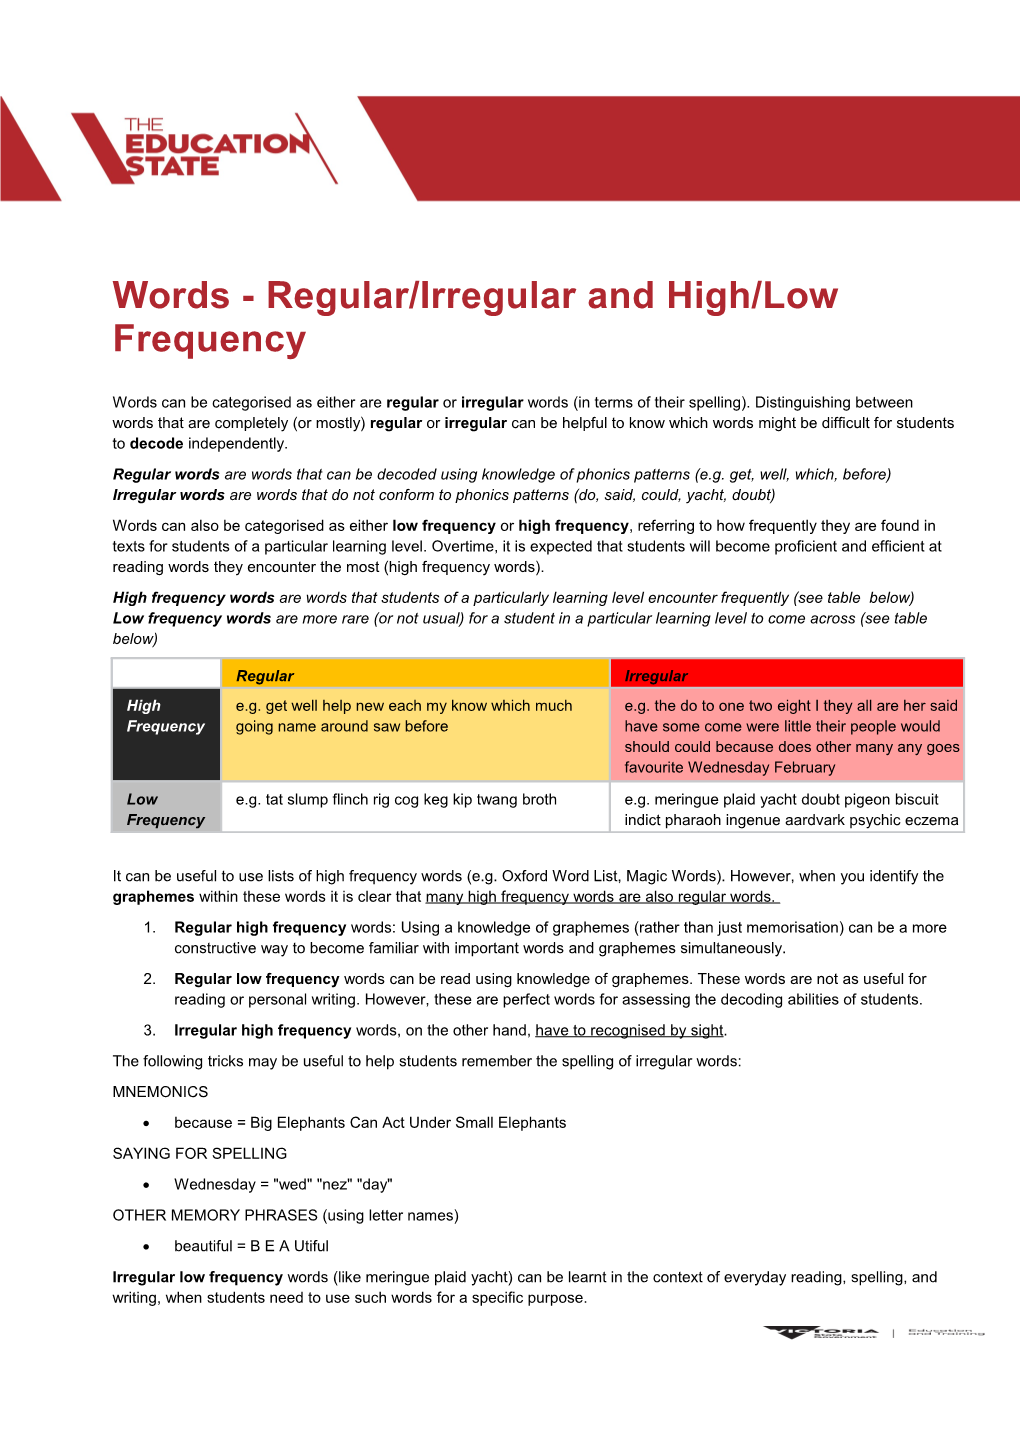 Words - Regular/Irregular and High/Low Frequency